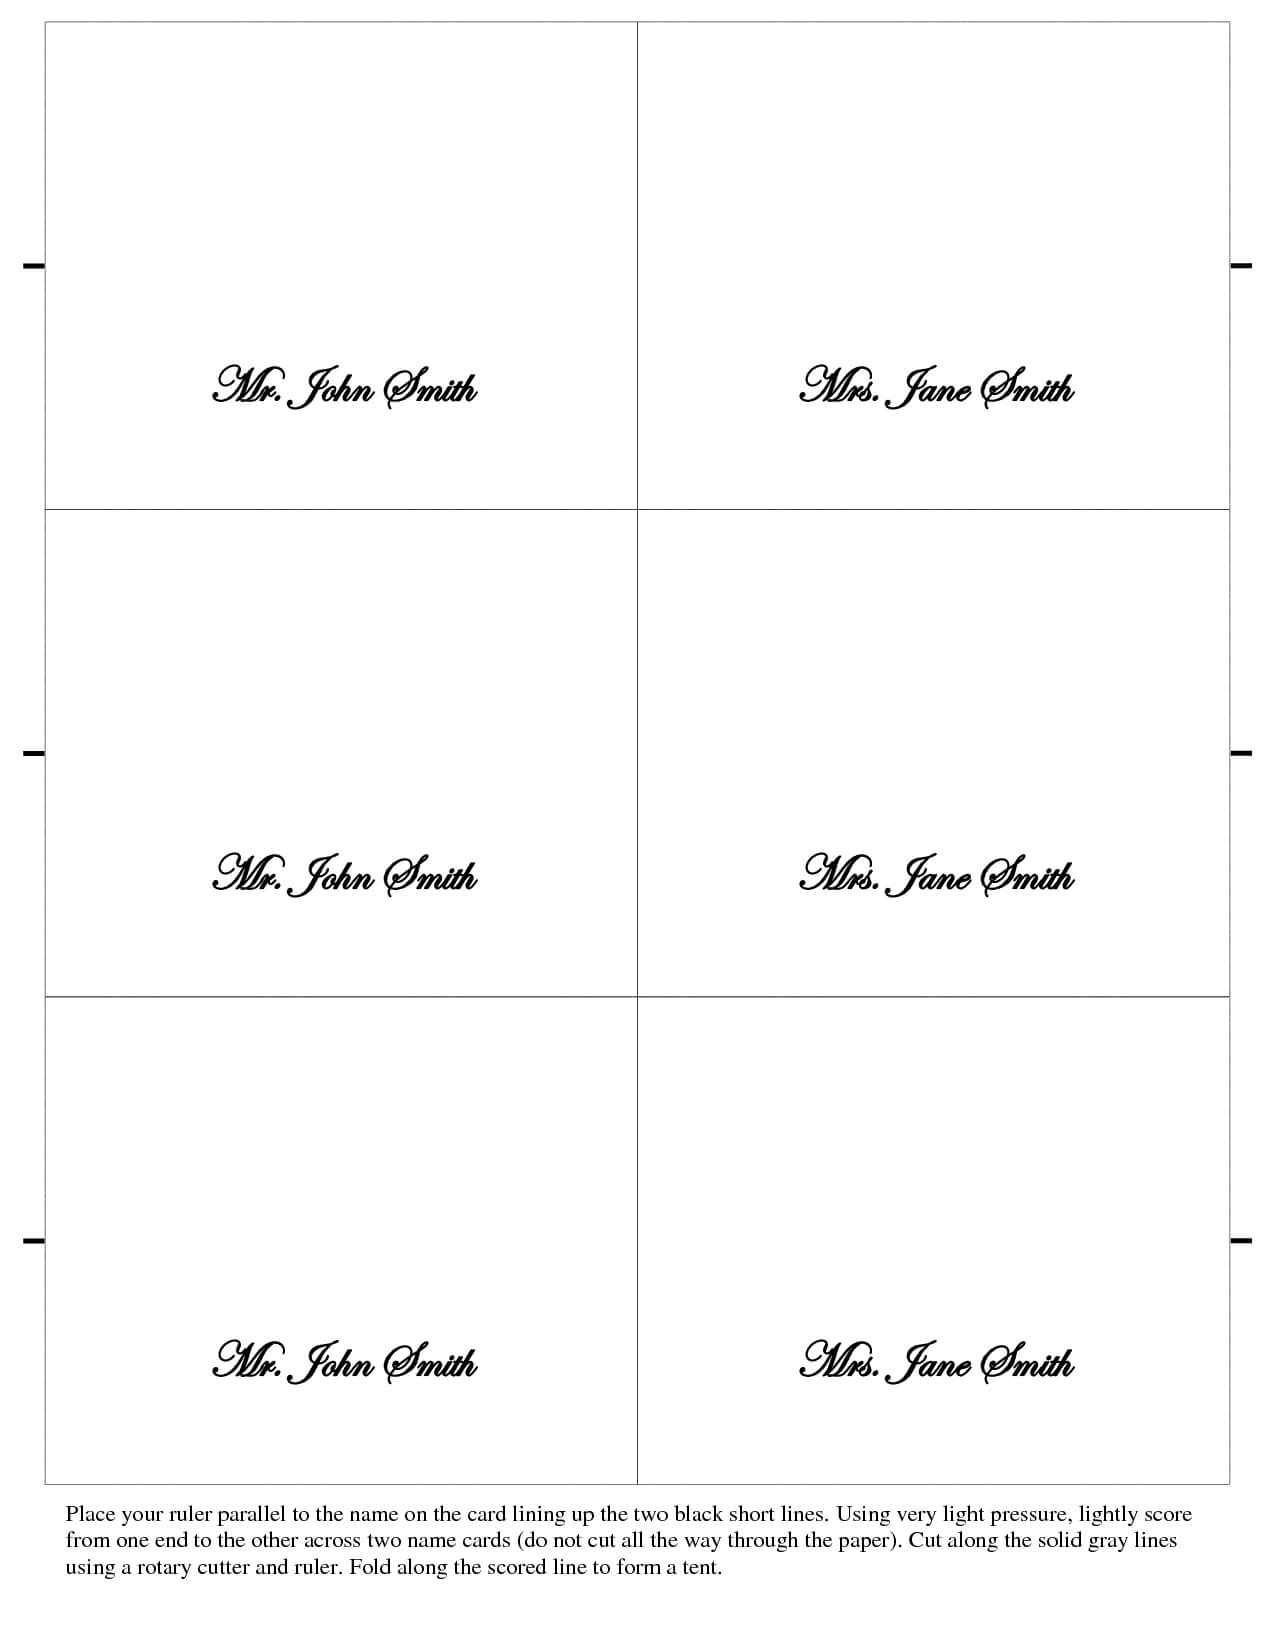 003 Free Place Card Template Ideas Table Mwd108673 Vert Pertaining To Free Place Card Templates 6 Per Page